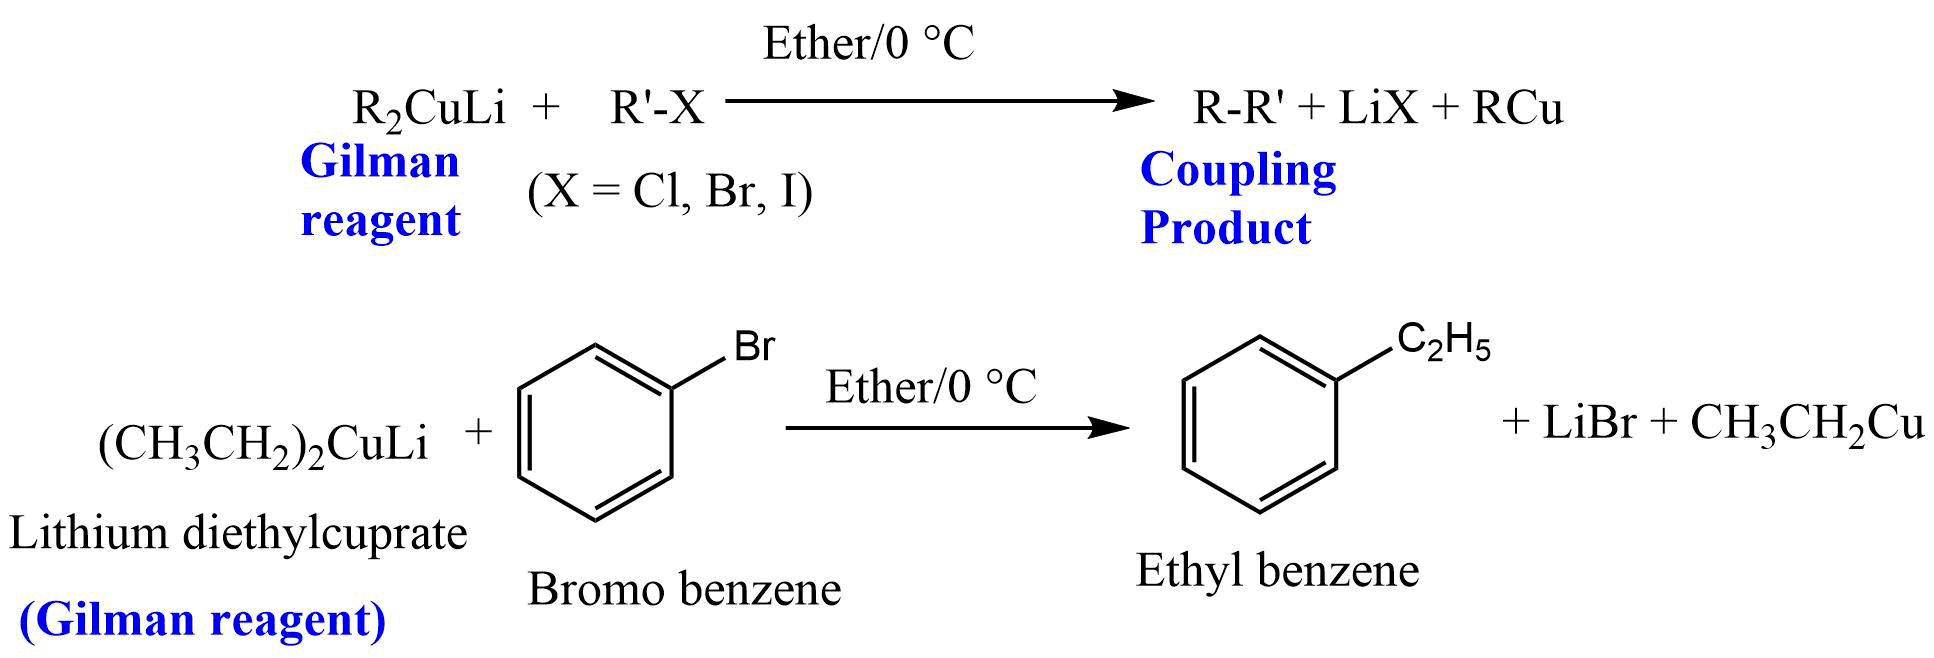 Coupling Reaction with Gilman Reagent